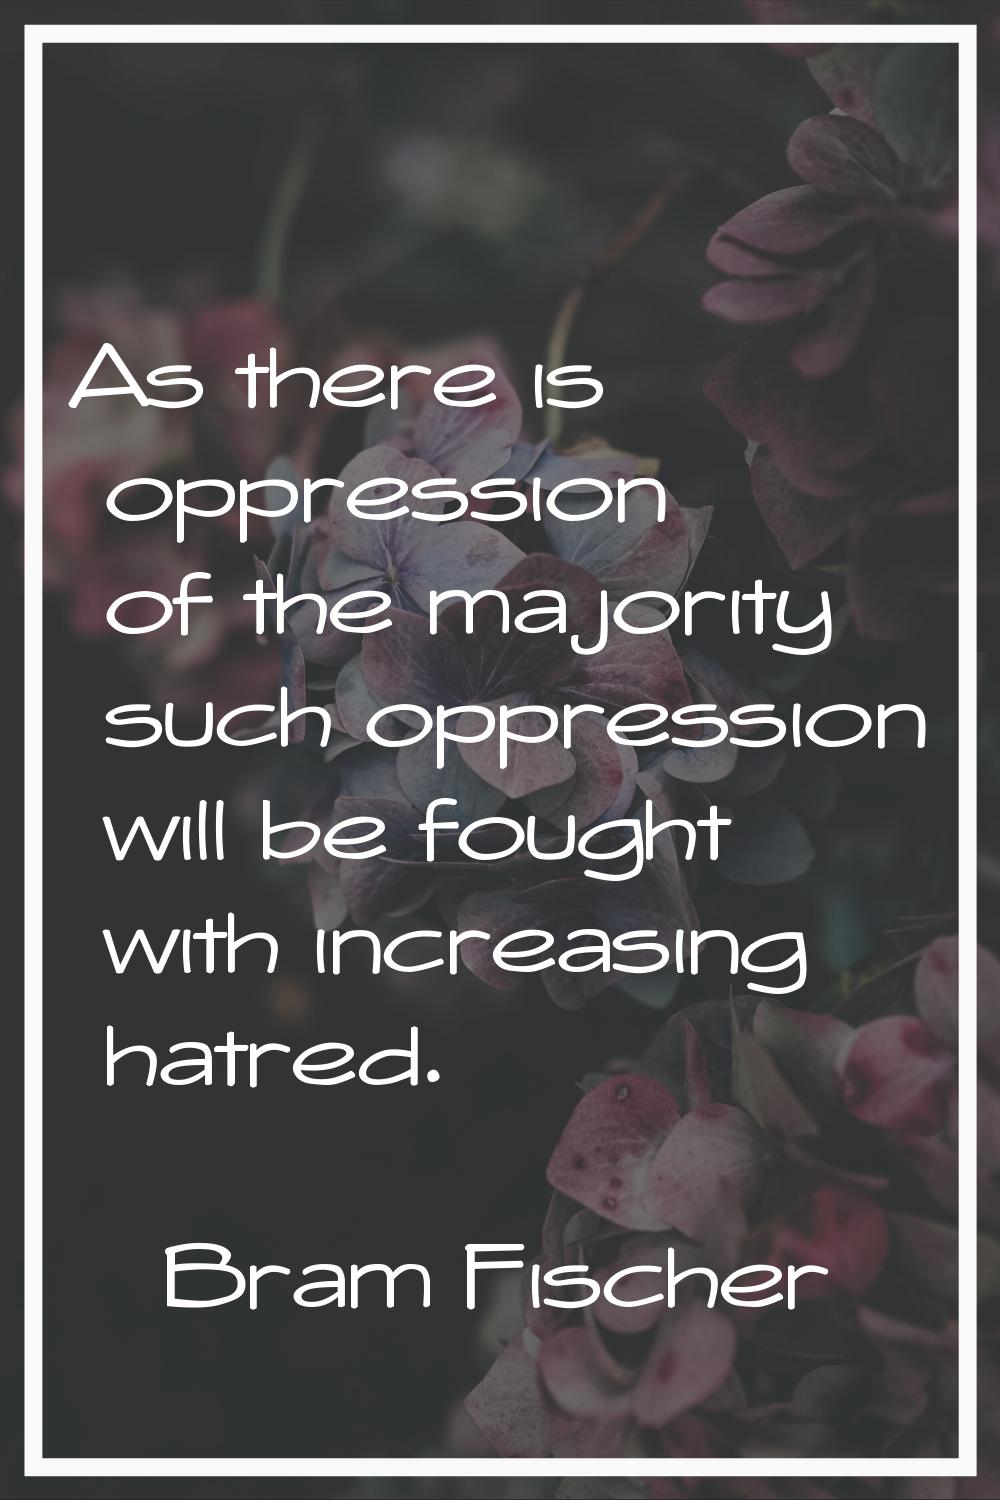 As there is oppression of the majority such oppression will be fought with increasing hatred.